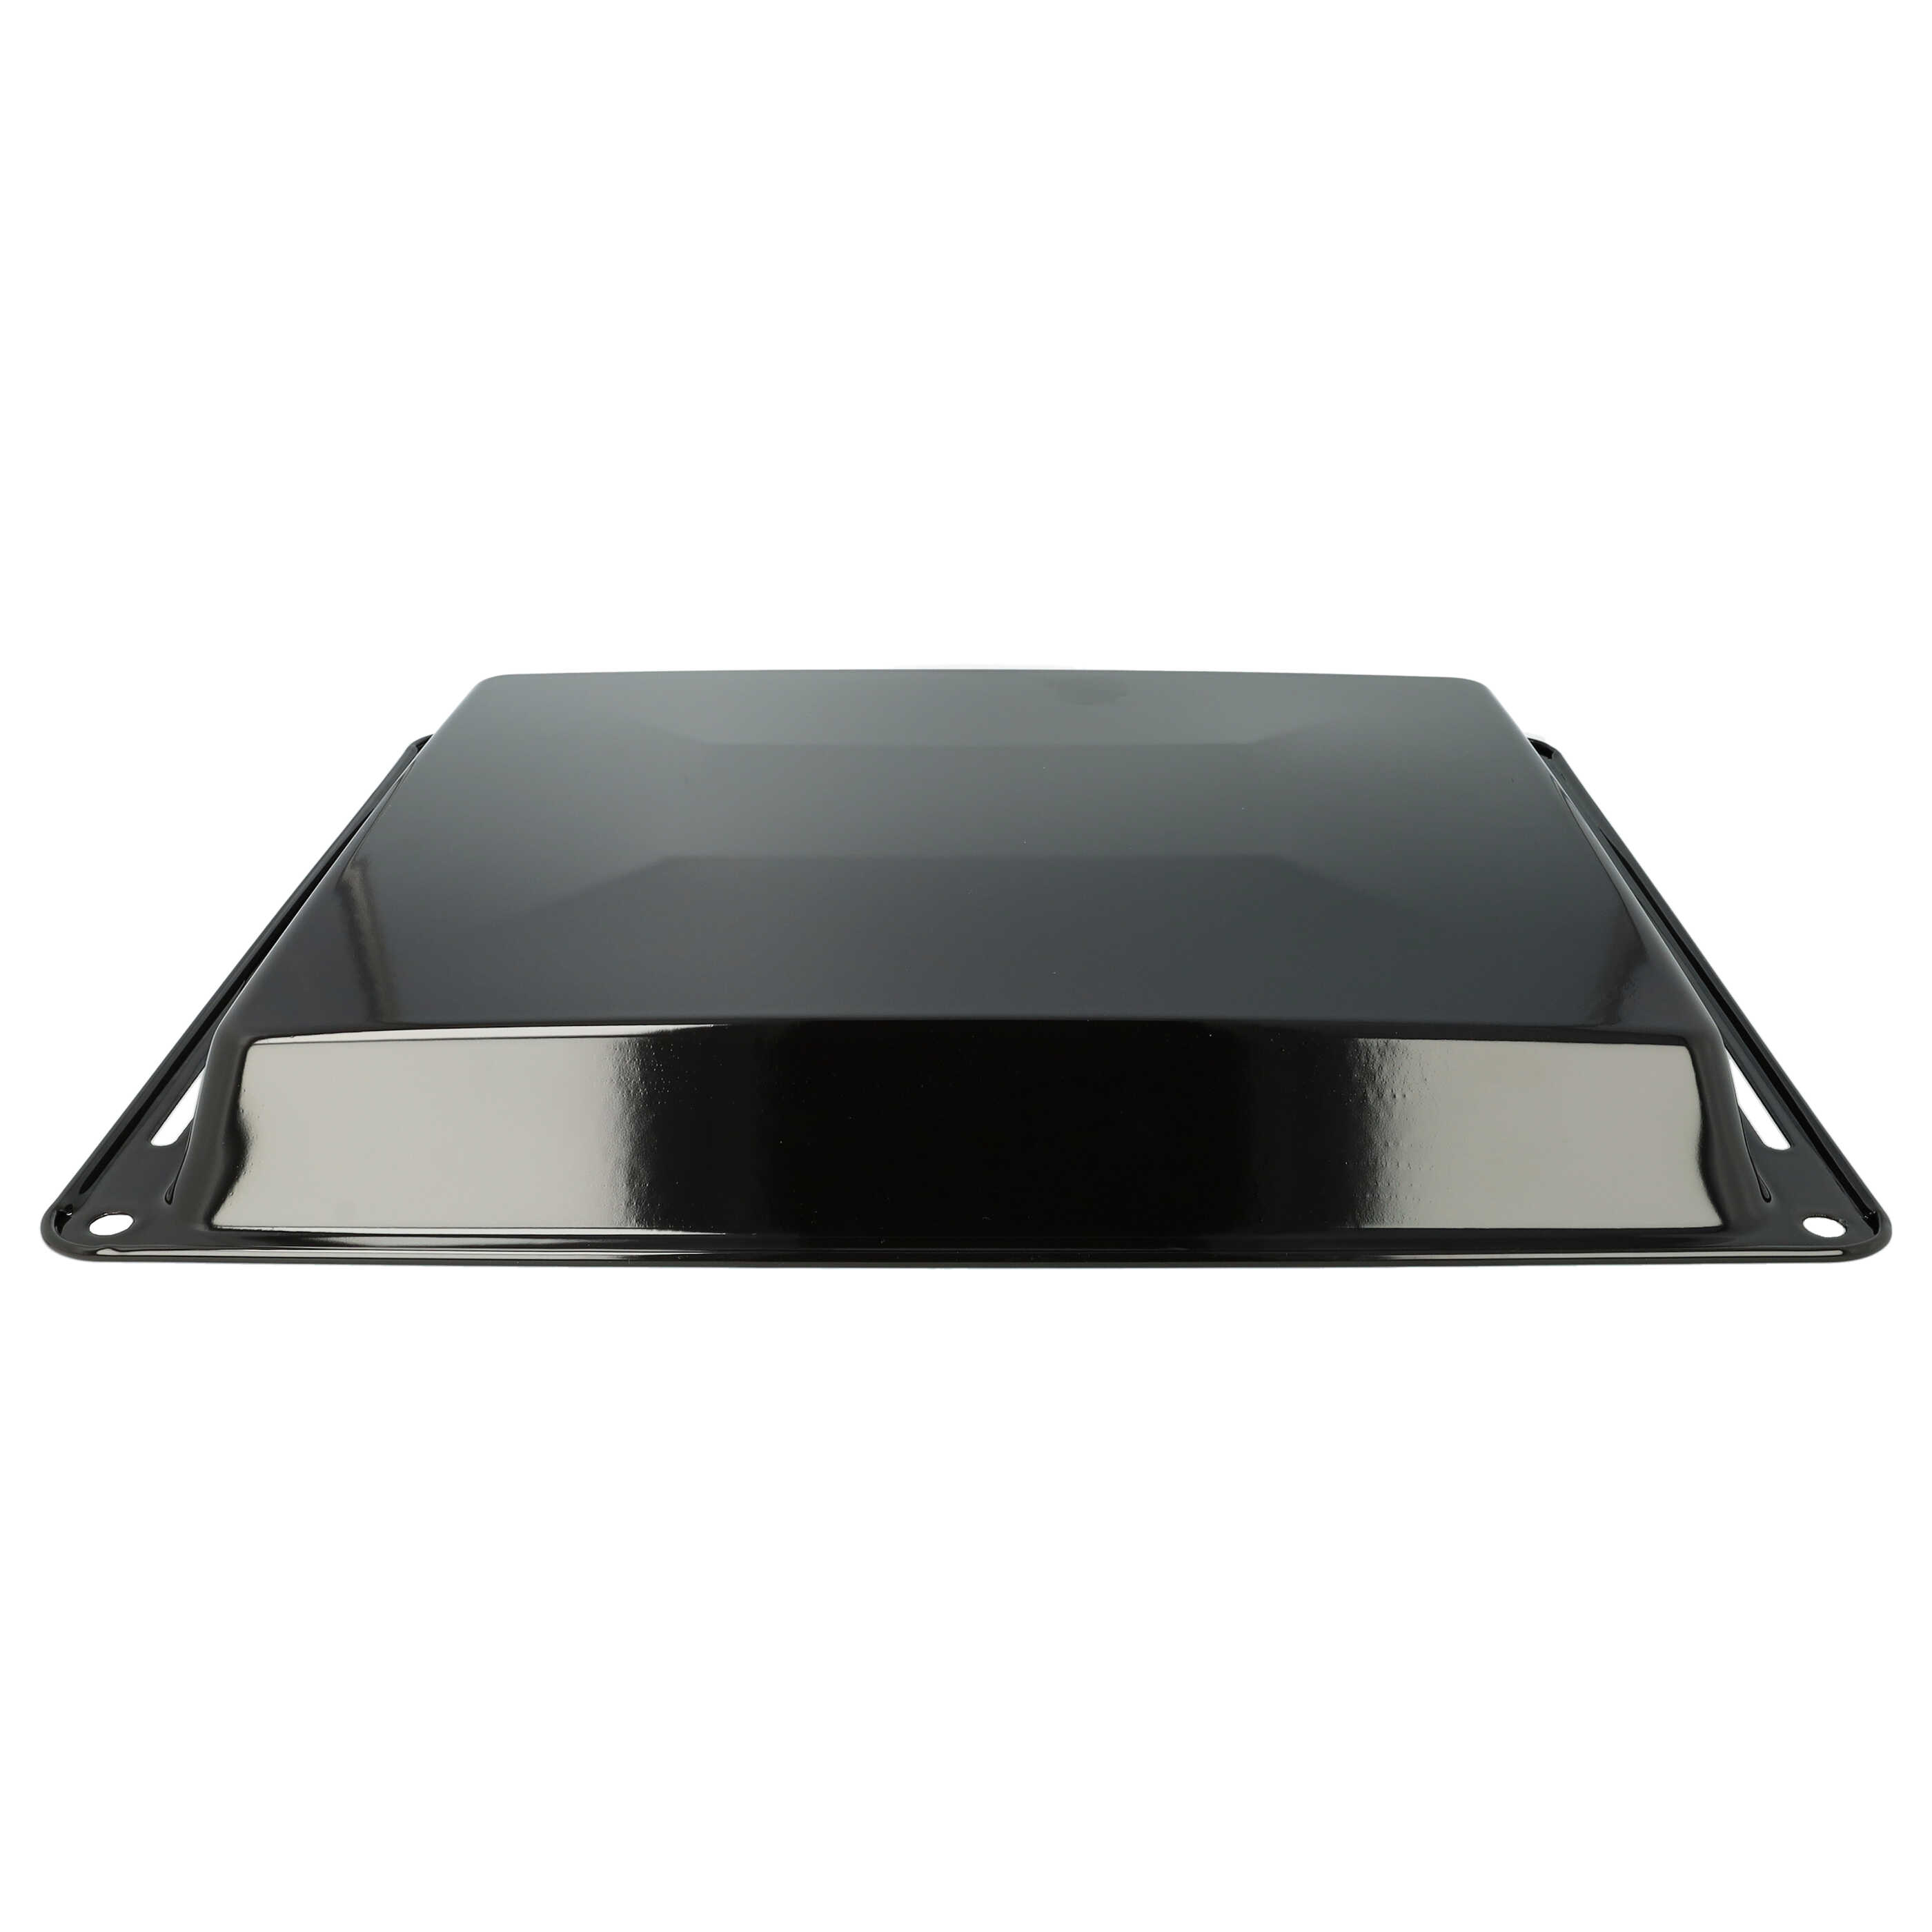 Baking Tray as Replacement for Indesit C00325793, ARI325934, C00325934 Oven - 44.5 x 37.5 x 4.4 cm